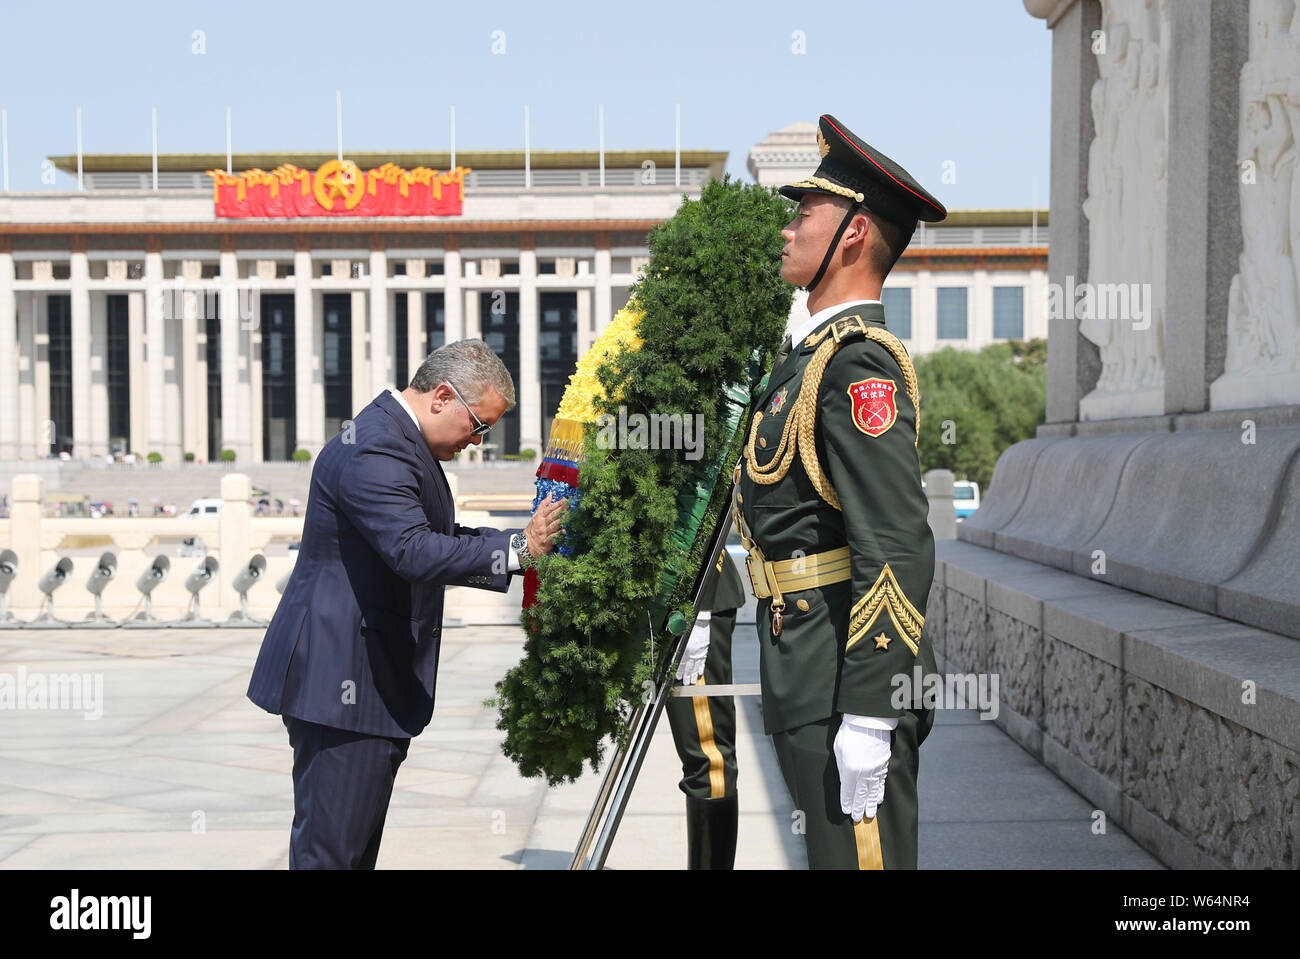 Beijing, China. 31st July, 2019. Colombian President Ivan Duque Marquez lays a wreath at the Monument to the People's Heroes at the Tian'anmen Square in Beijing, capital of China, July 31, 2019. Credit: Ding Haitao/Xinhua/Alamy Live News Stock Photo